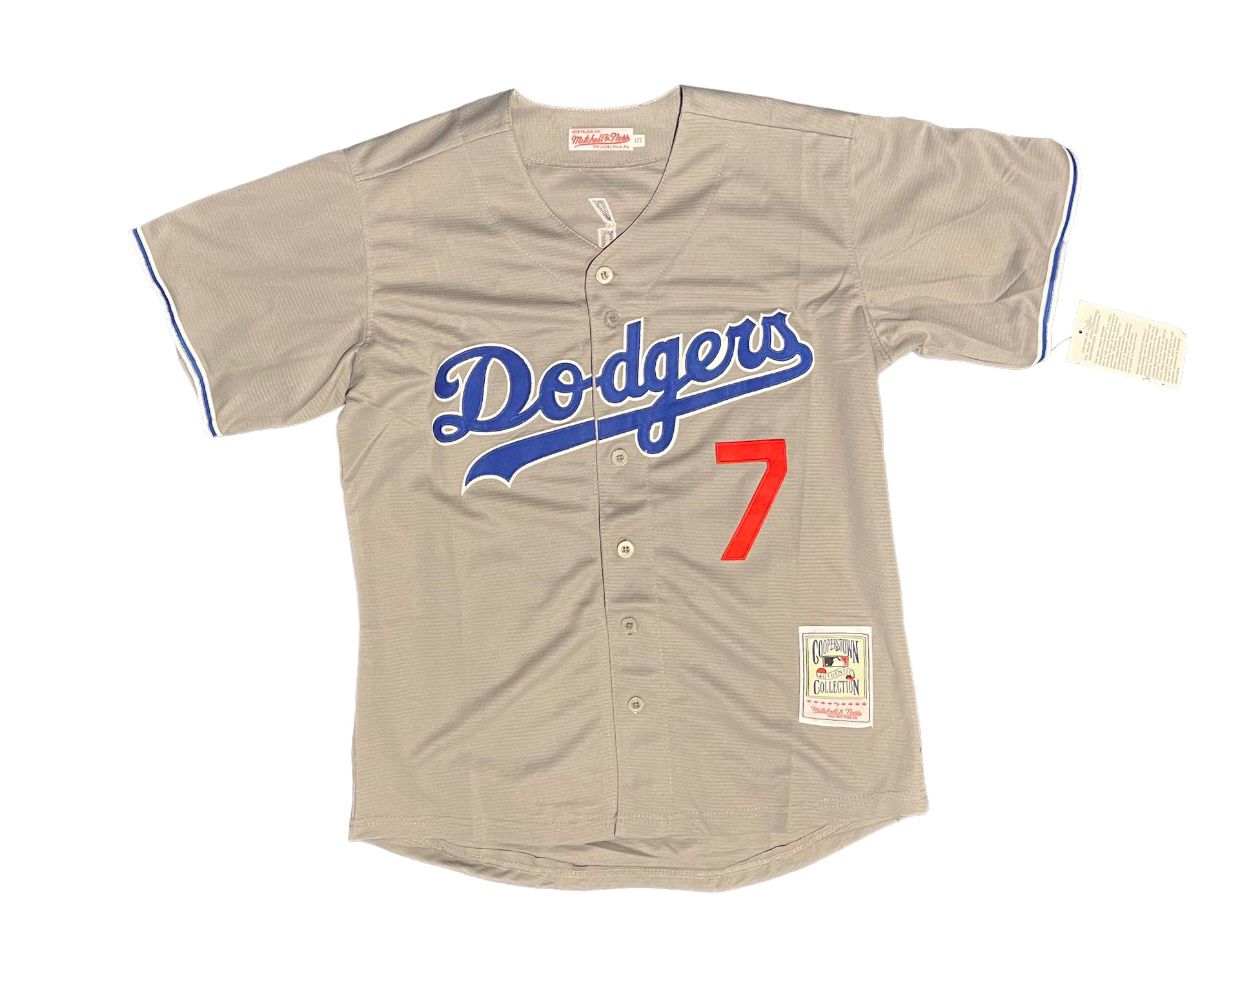 julio urias jersey Cheap Sell - OFF 61%